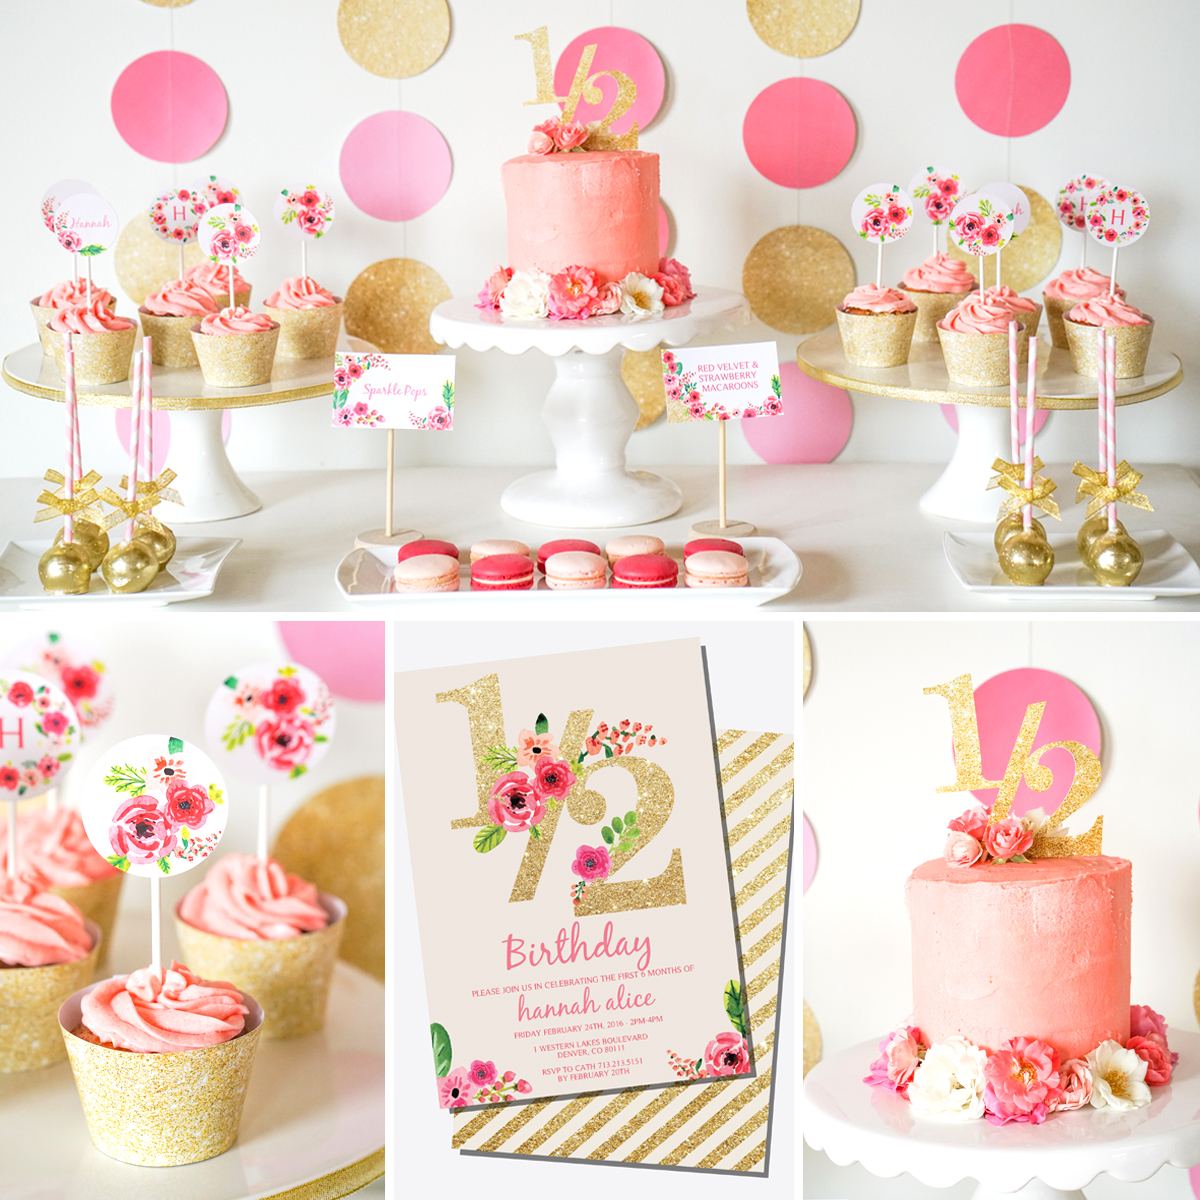 Half Birthday Party Printable Party Decor with watercolor florals and embellishments of gold glitter